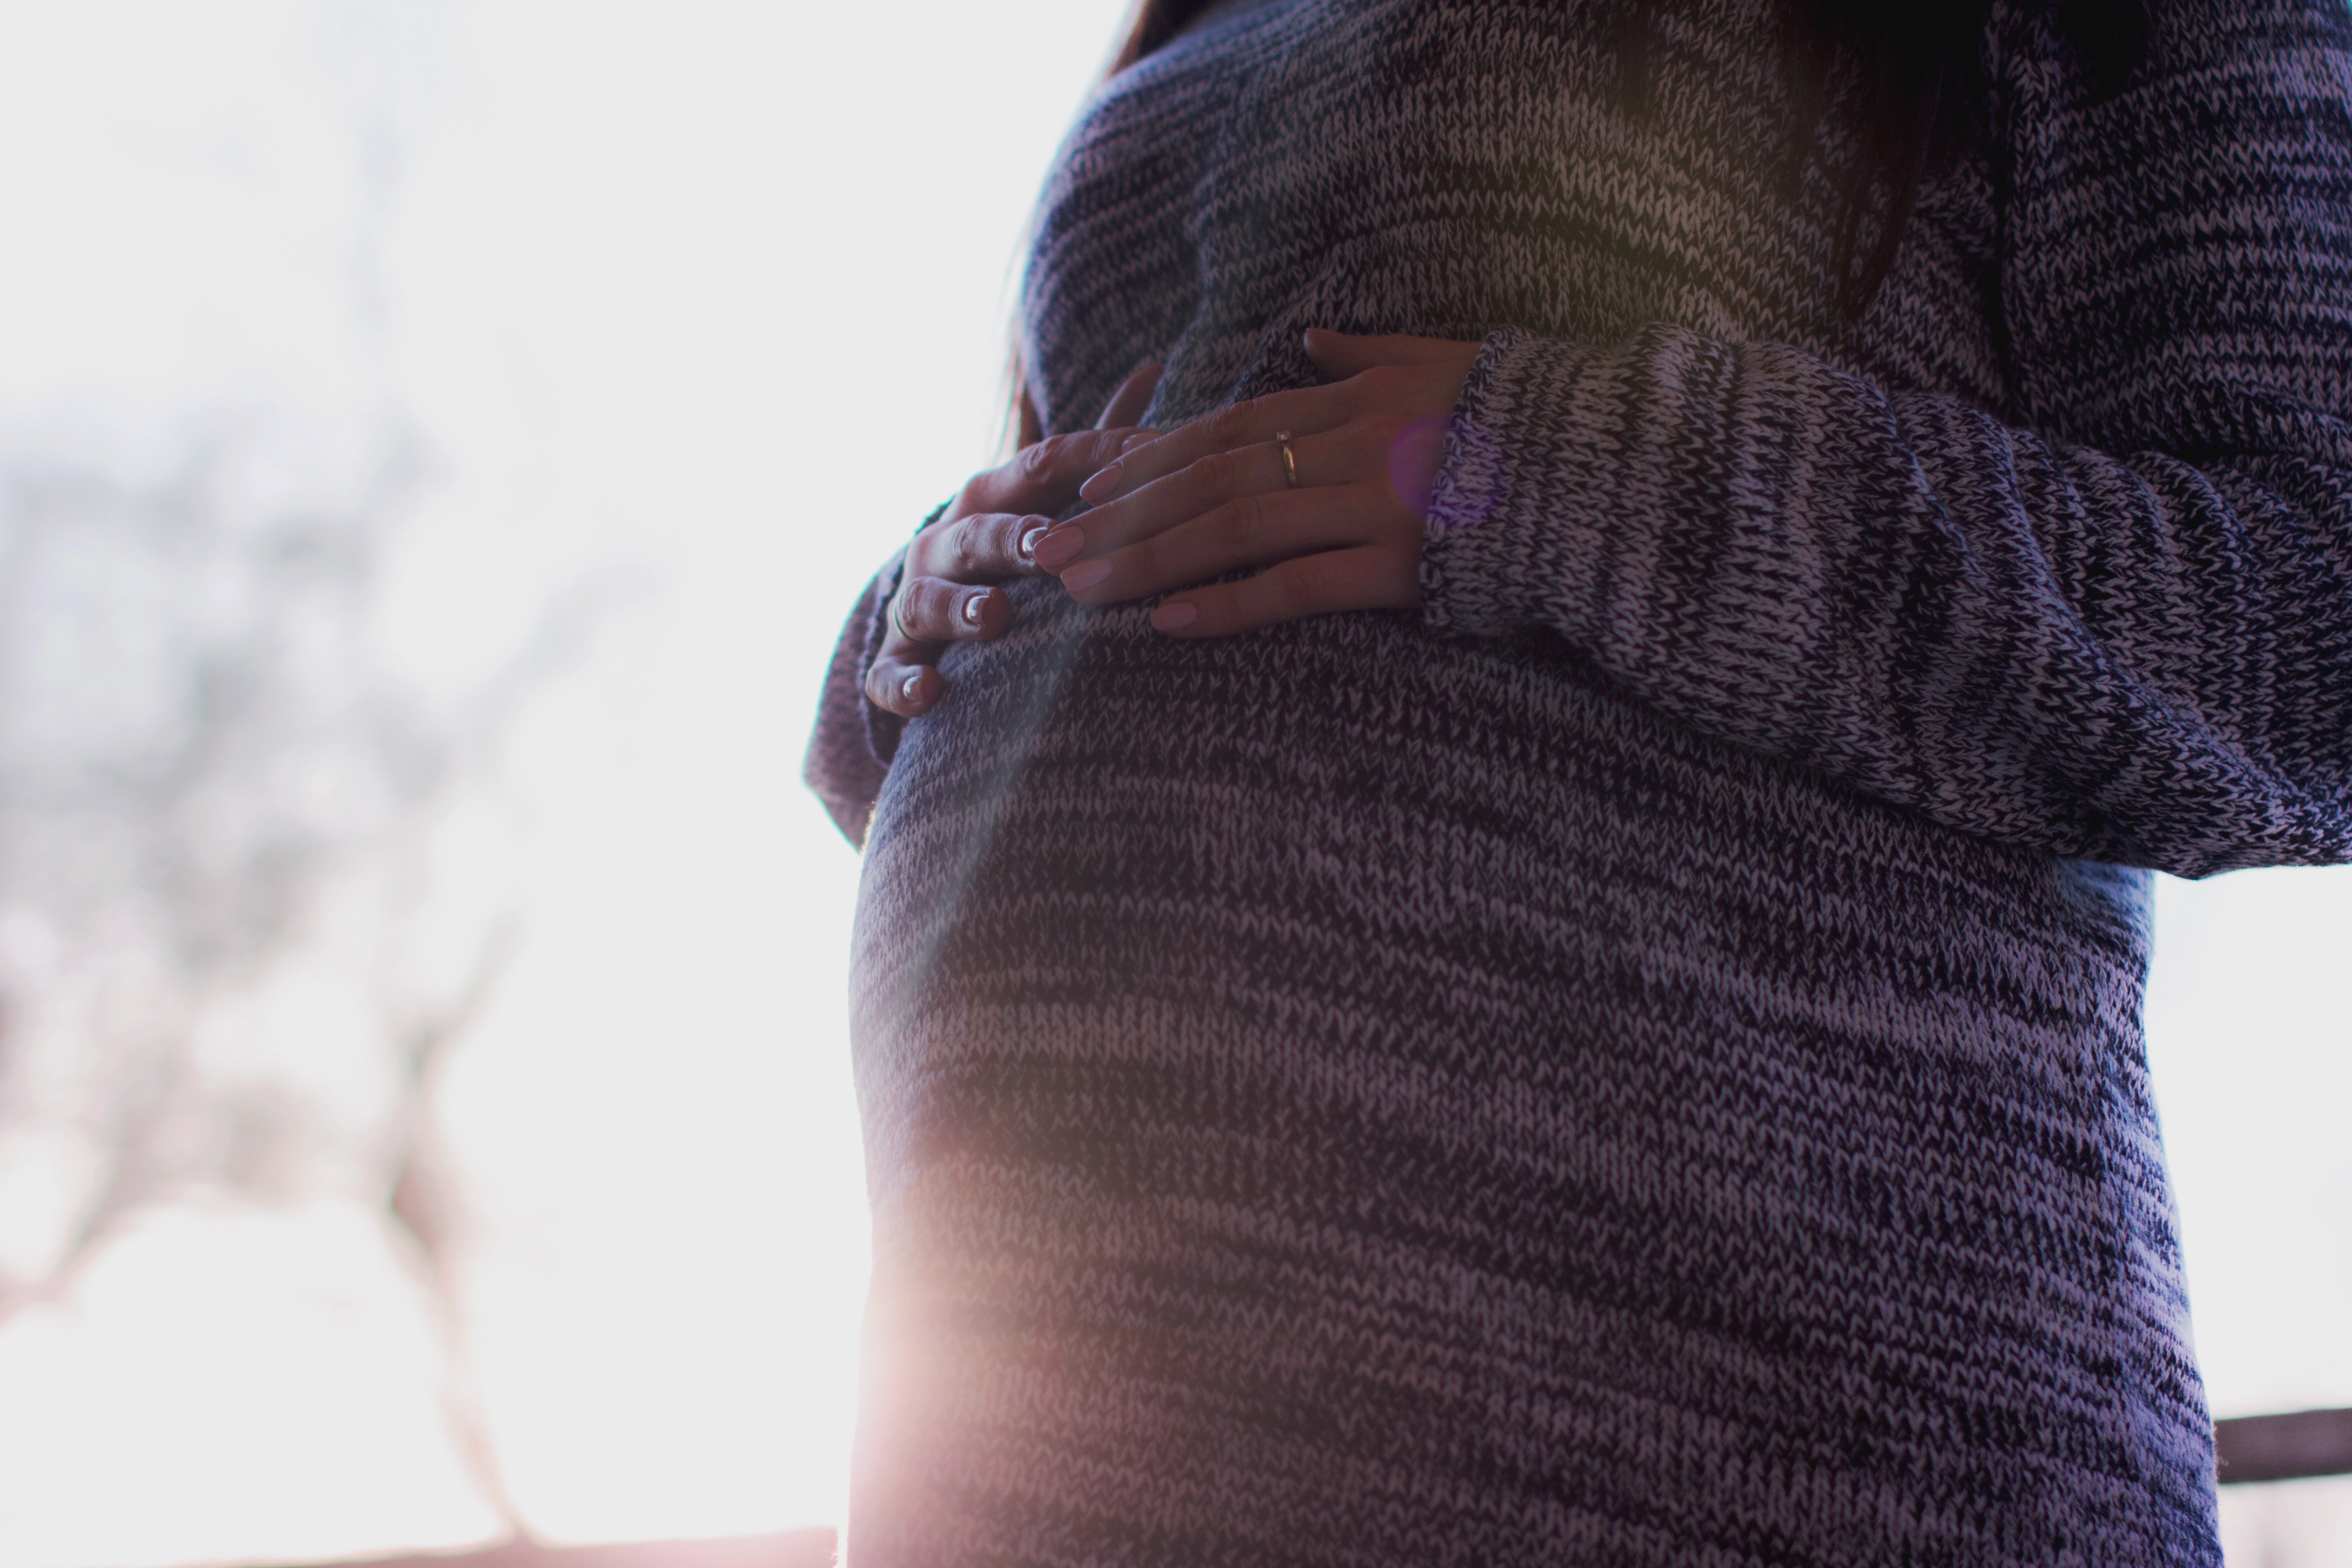 Pregnant woman placing her hands on her baby bump. | Source: Unsplash